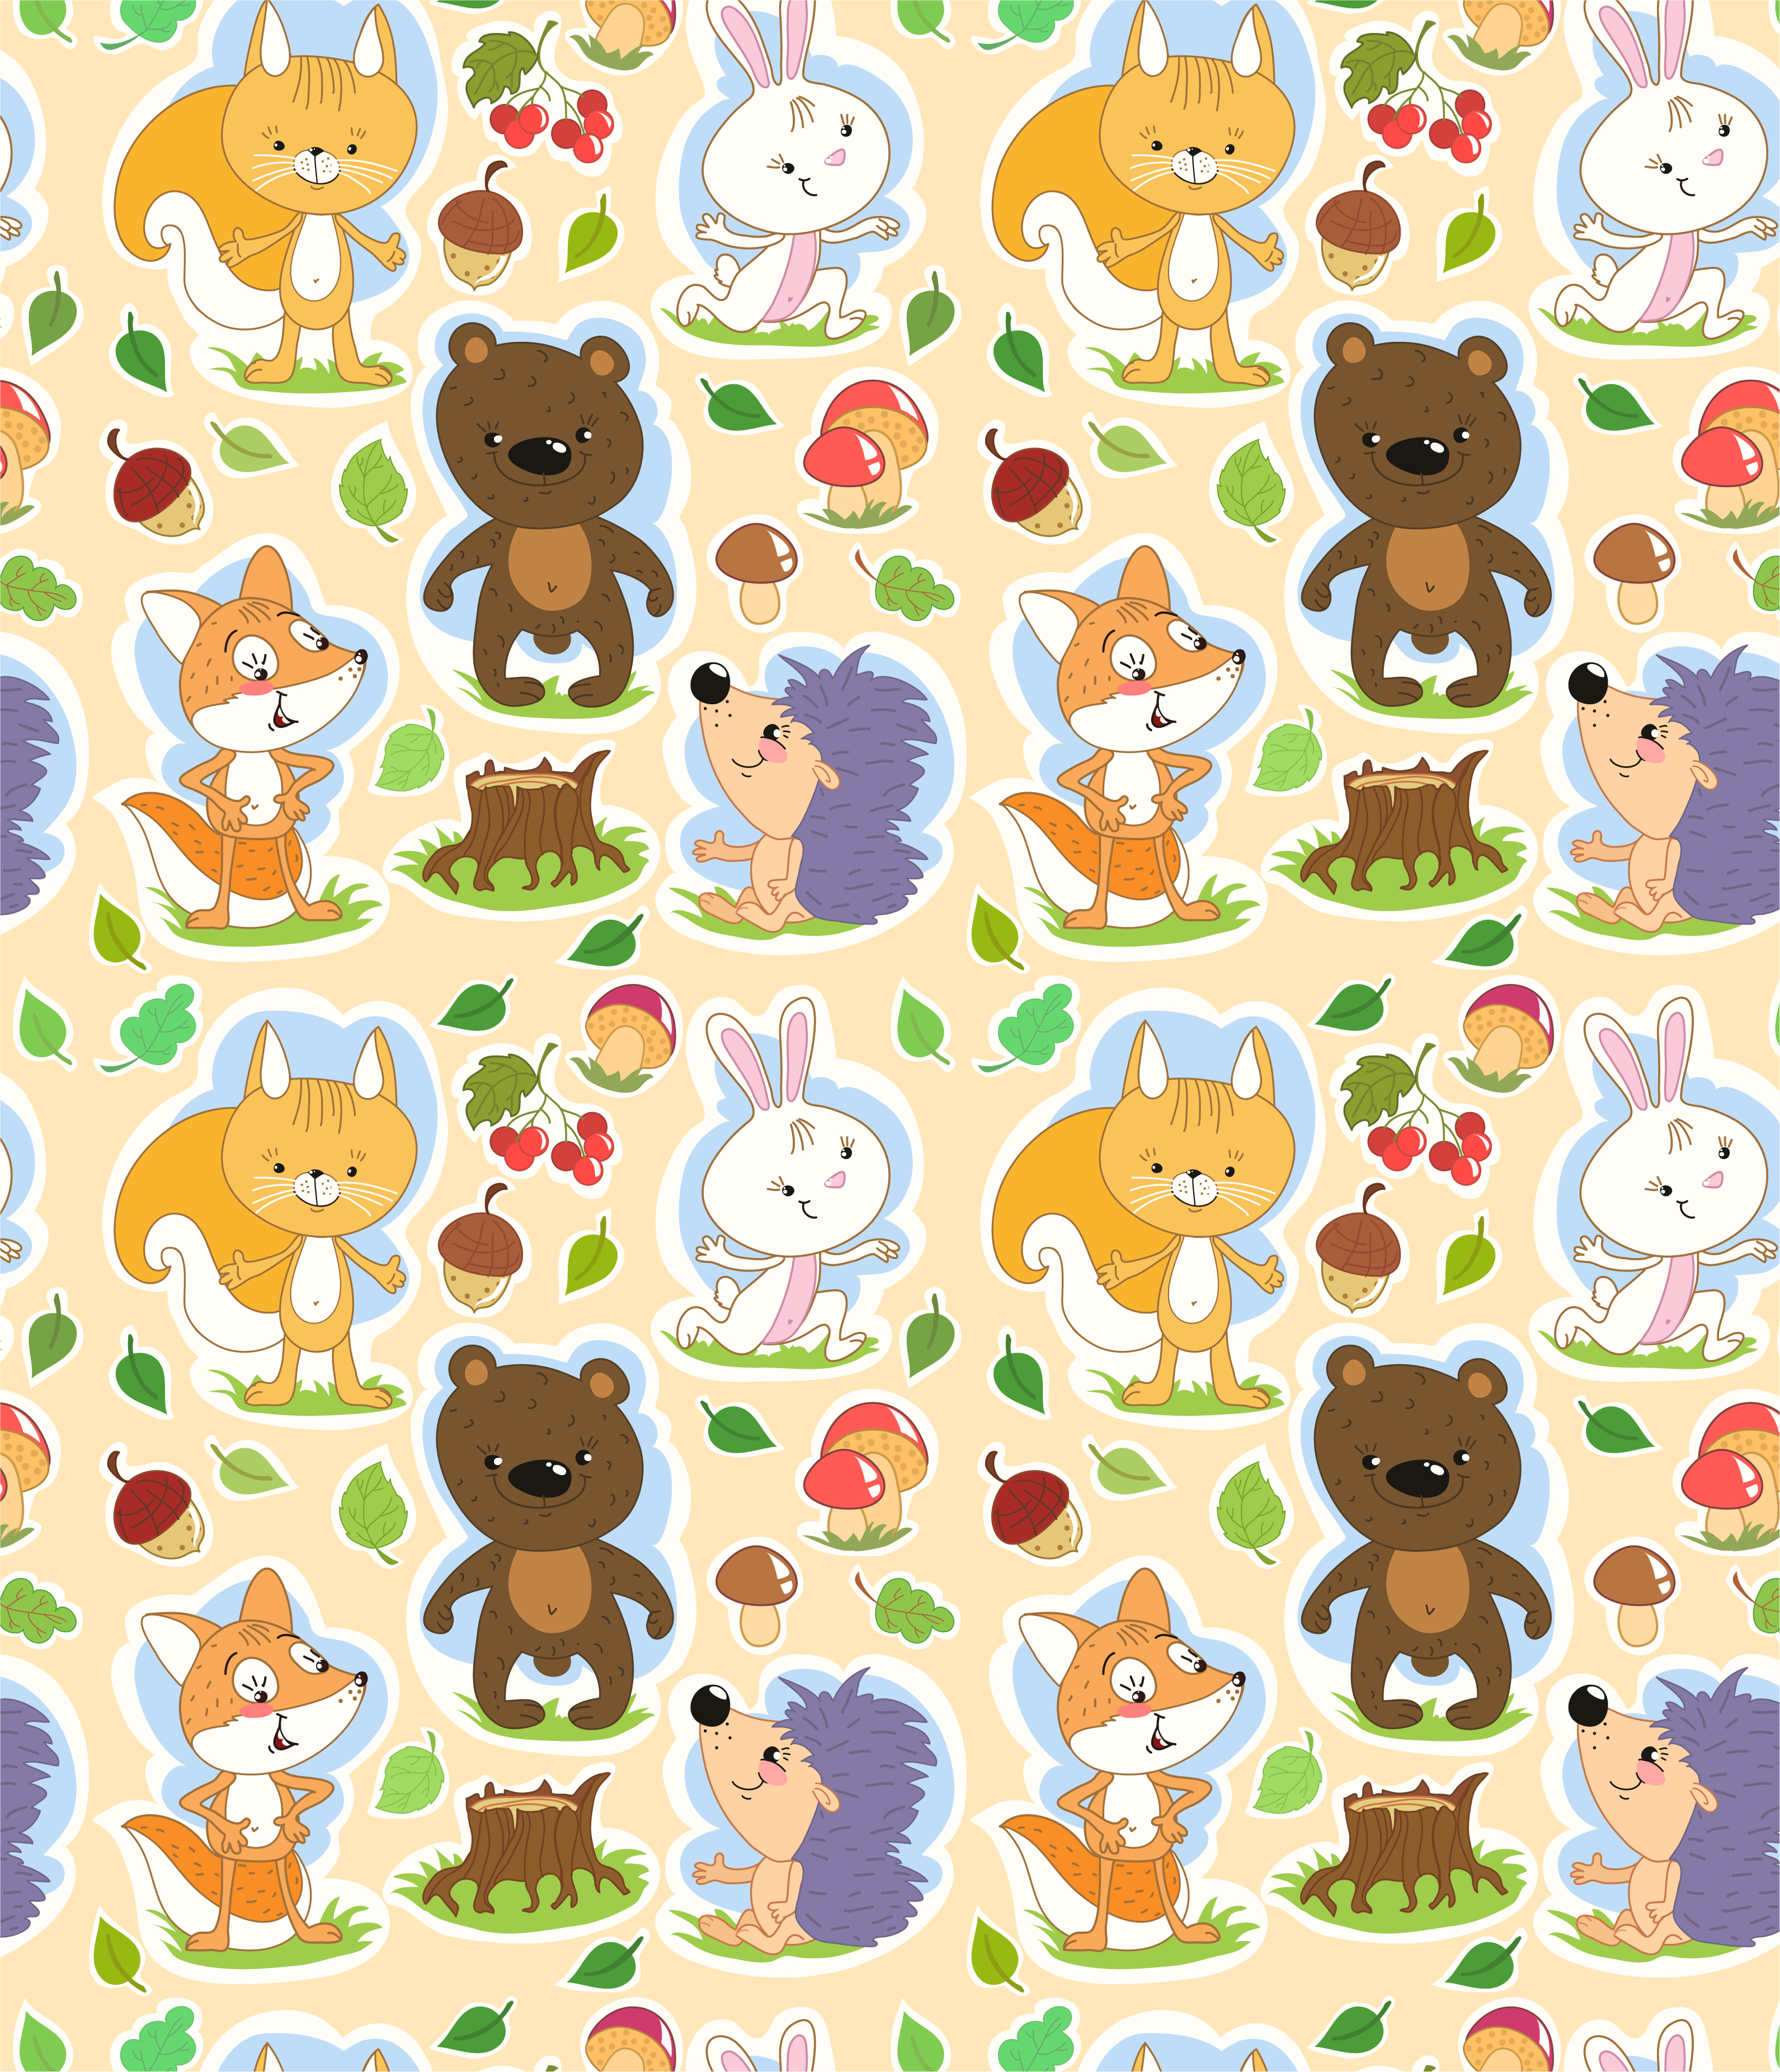 Animal forest pattern